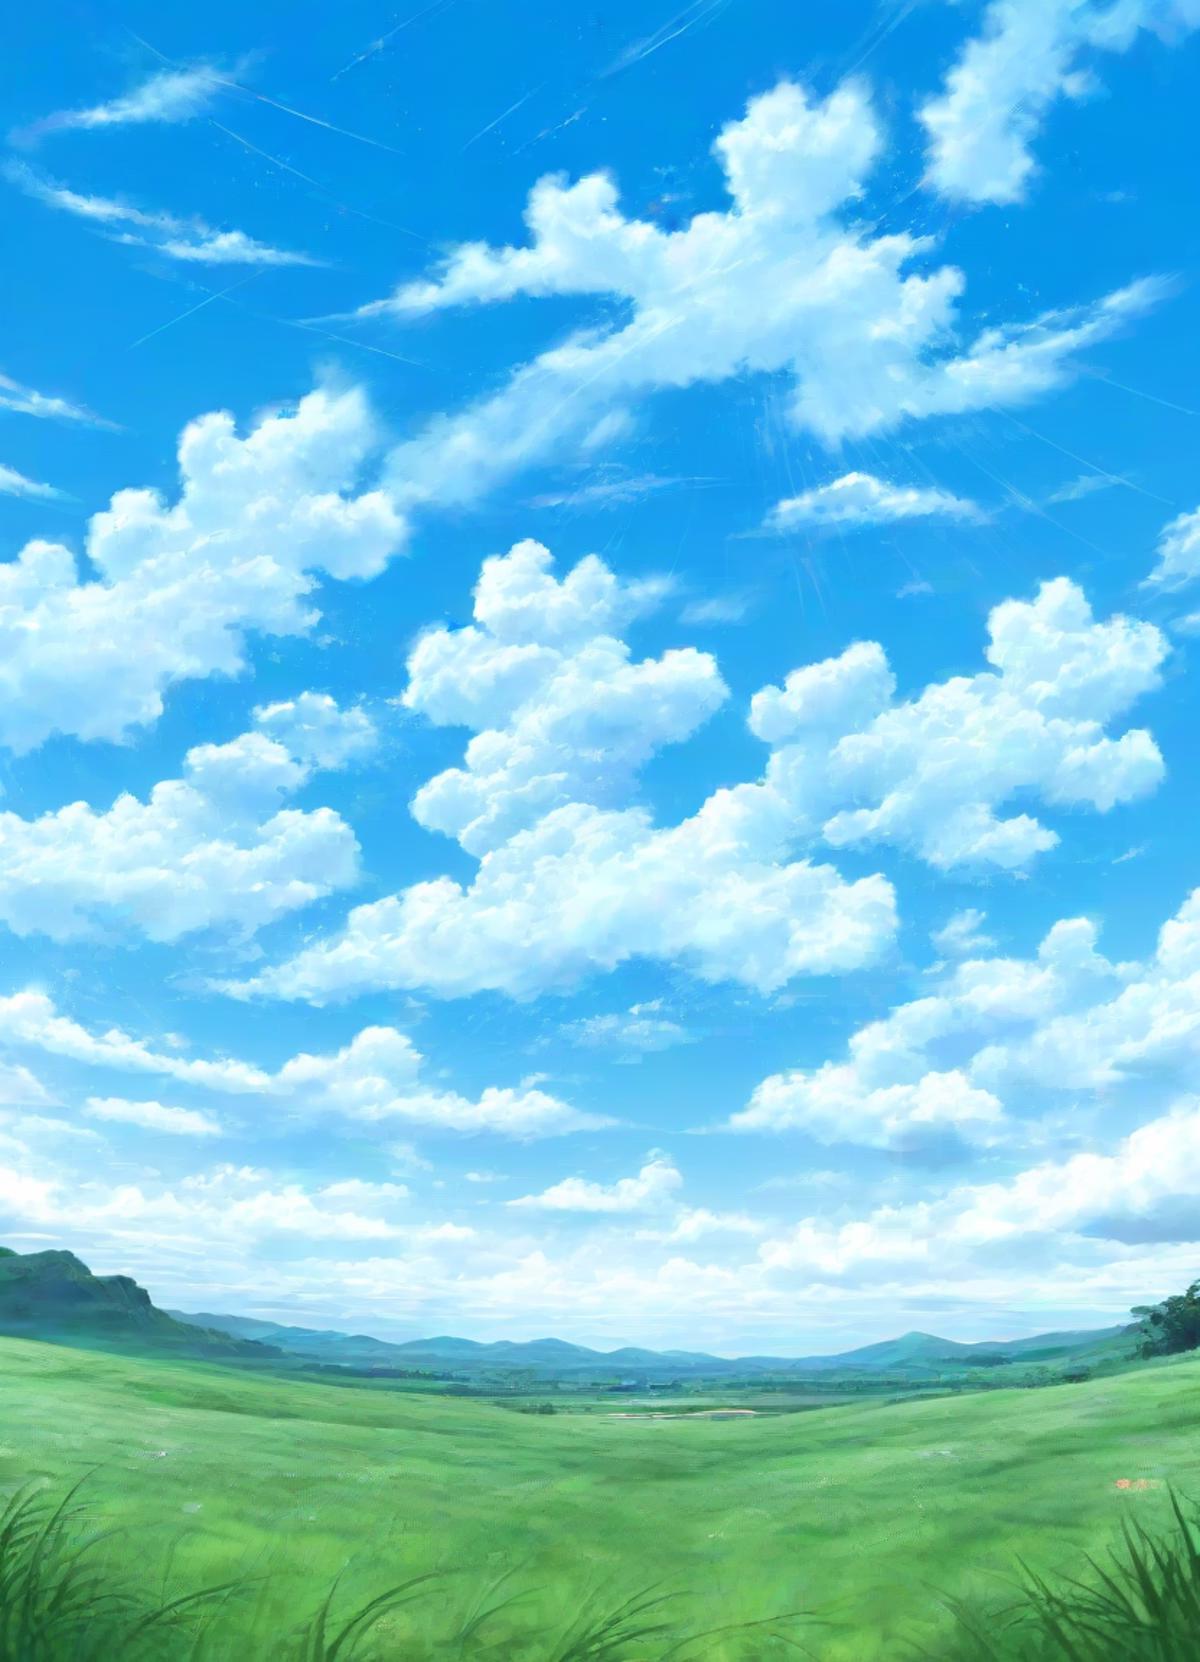 PE Anime Background / Landscapes [Style] image by Proompt_Engineer